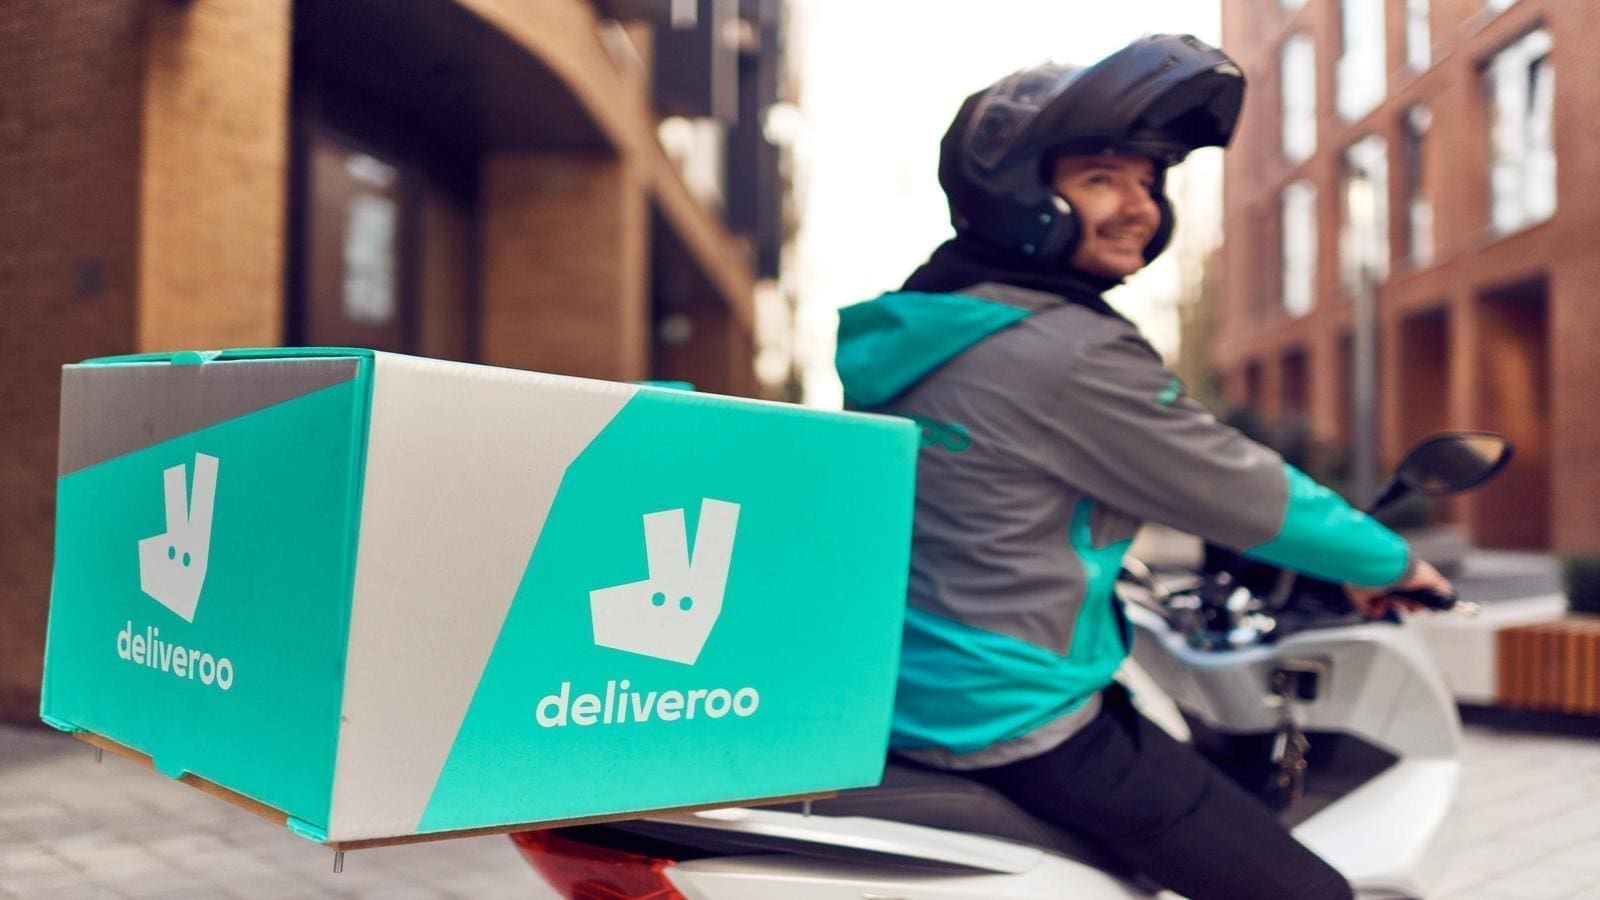 Online meal delivery service Deliveroo achieves US$7B valuation following successful series H funding round